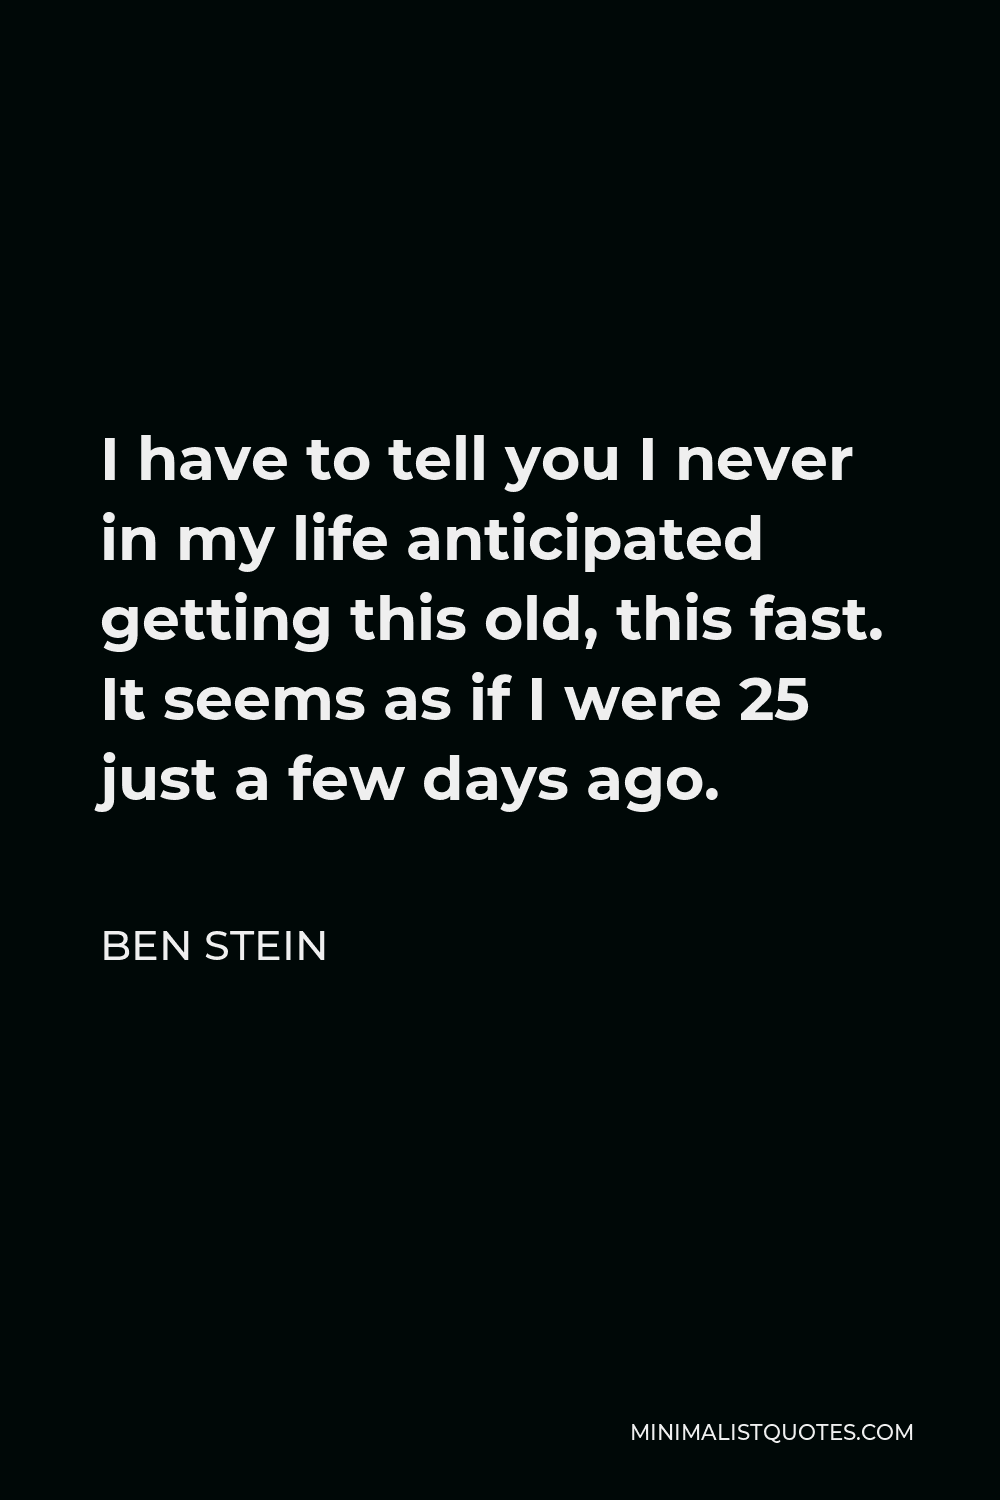 Ben Stein Quote - I have to tell you I never in my life anticipated getting this old, this fast. It seems as if I were 25 just a few days ago.